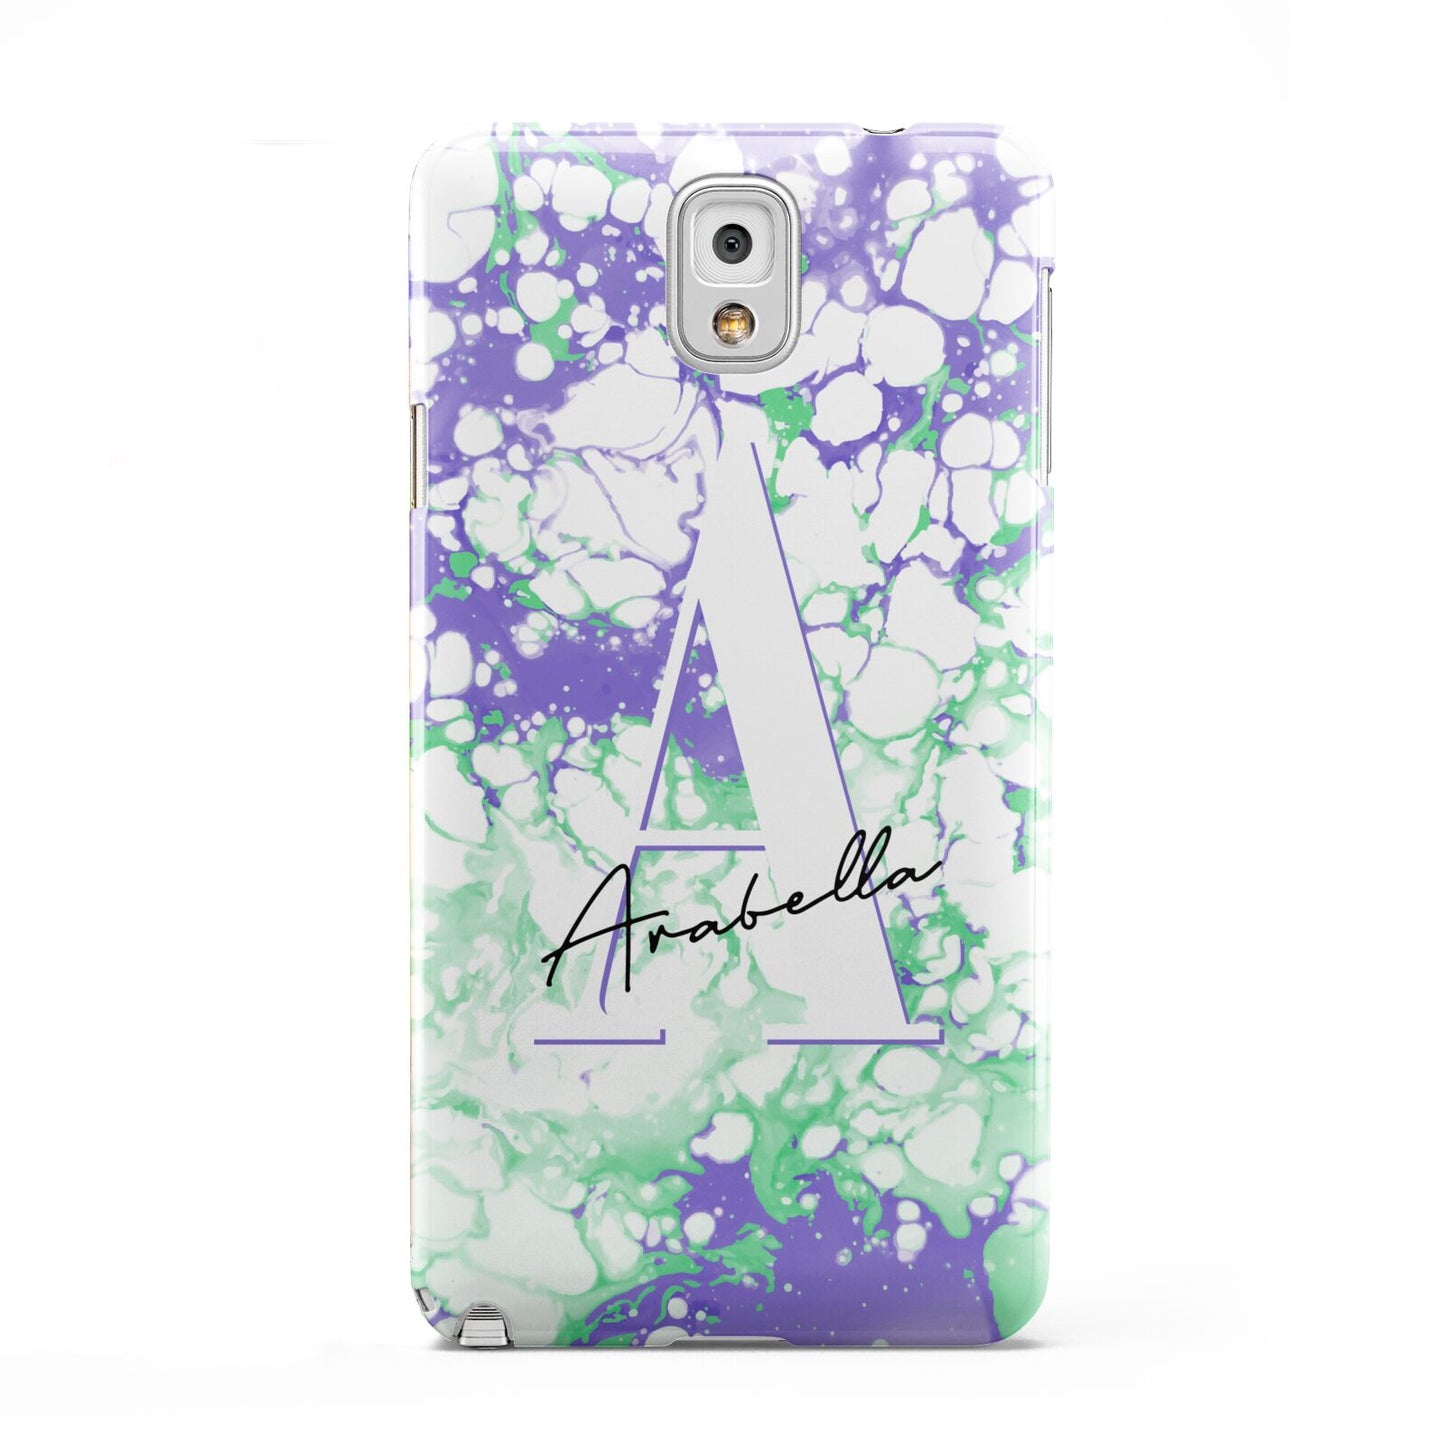 Personalised Liquid Marble Samsung Galaxy Note 3 Case